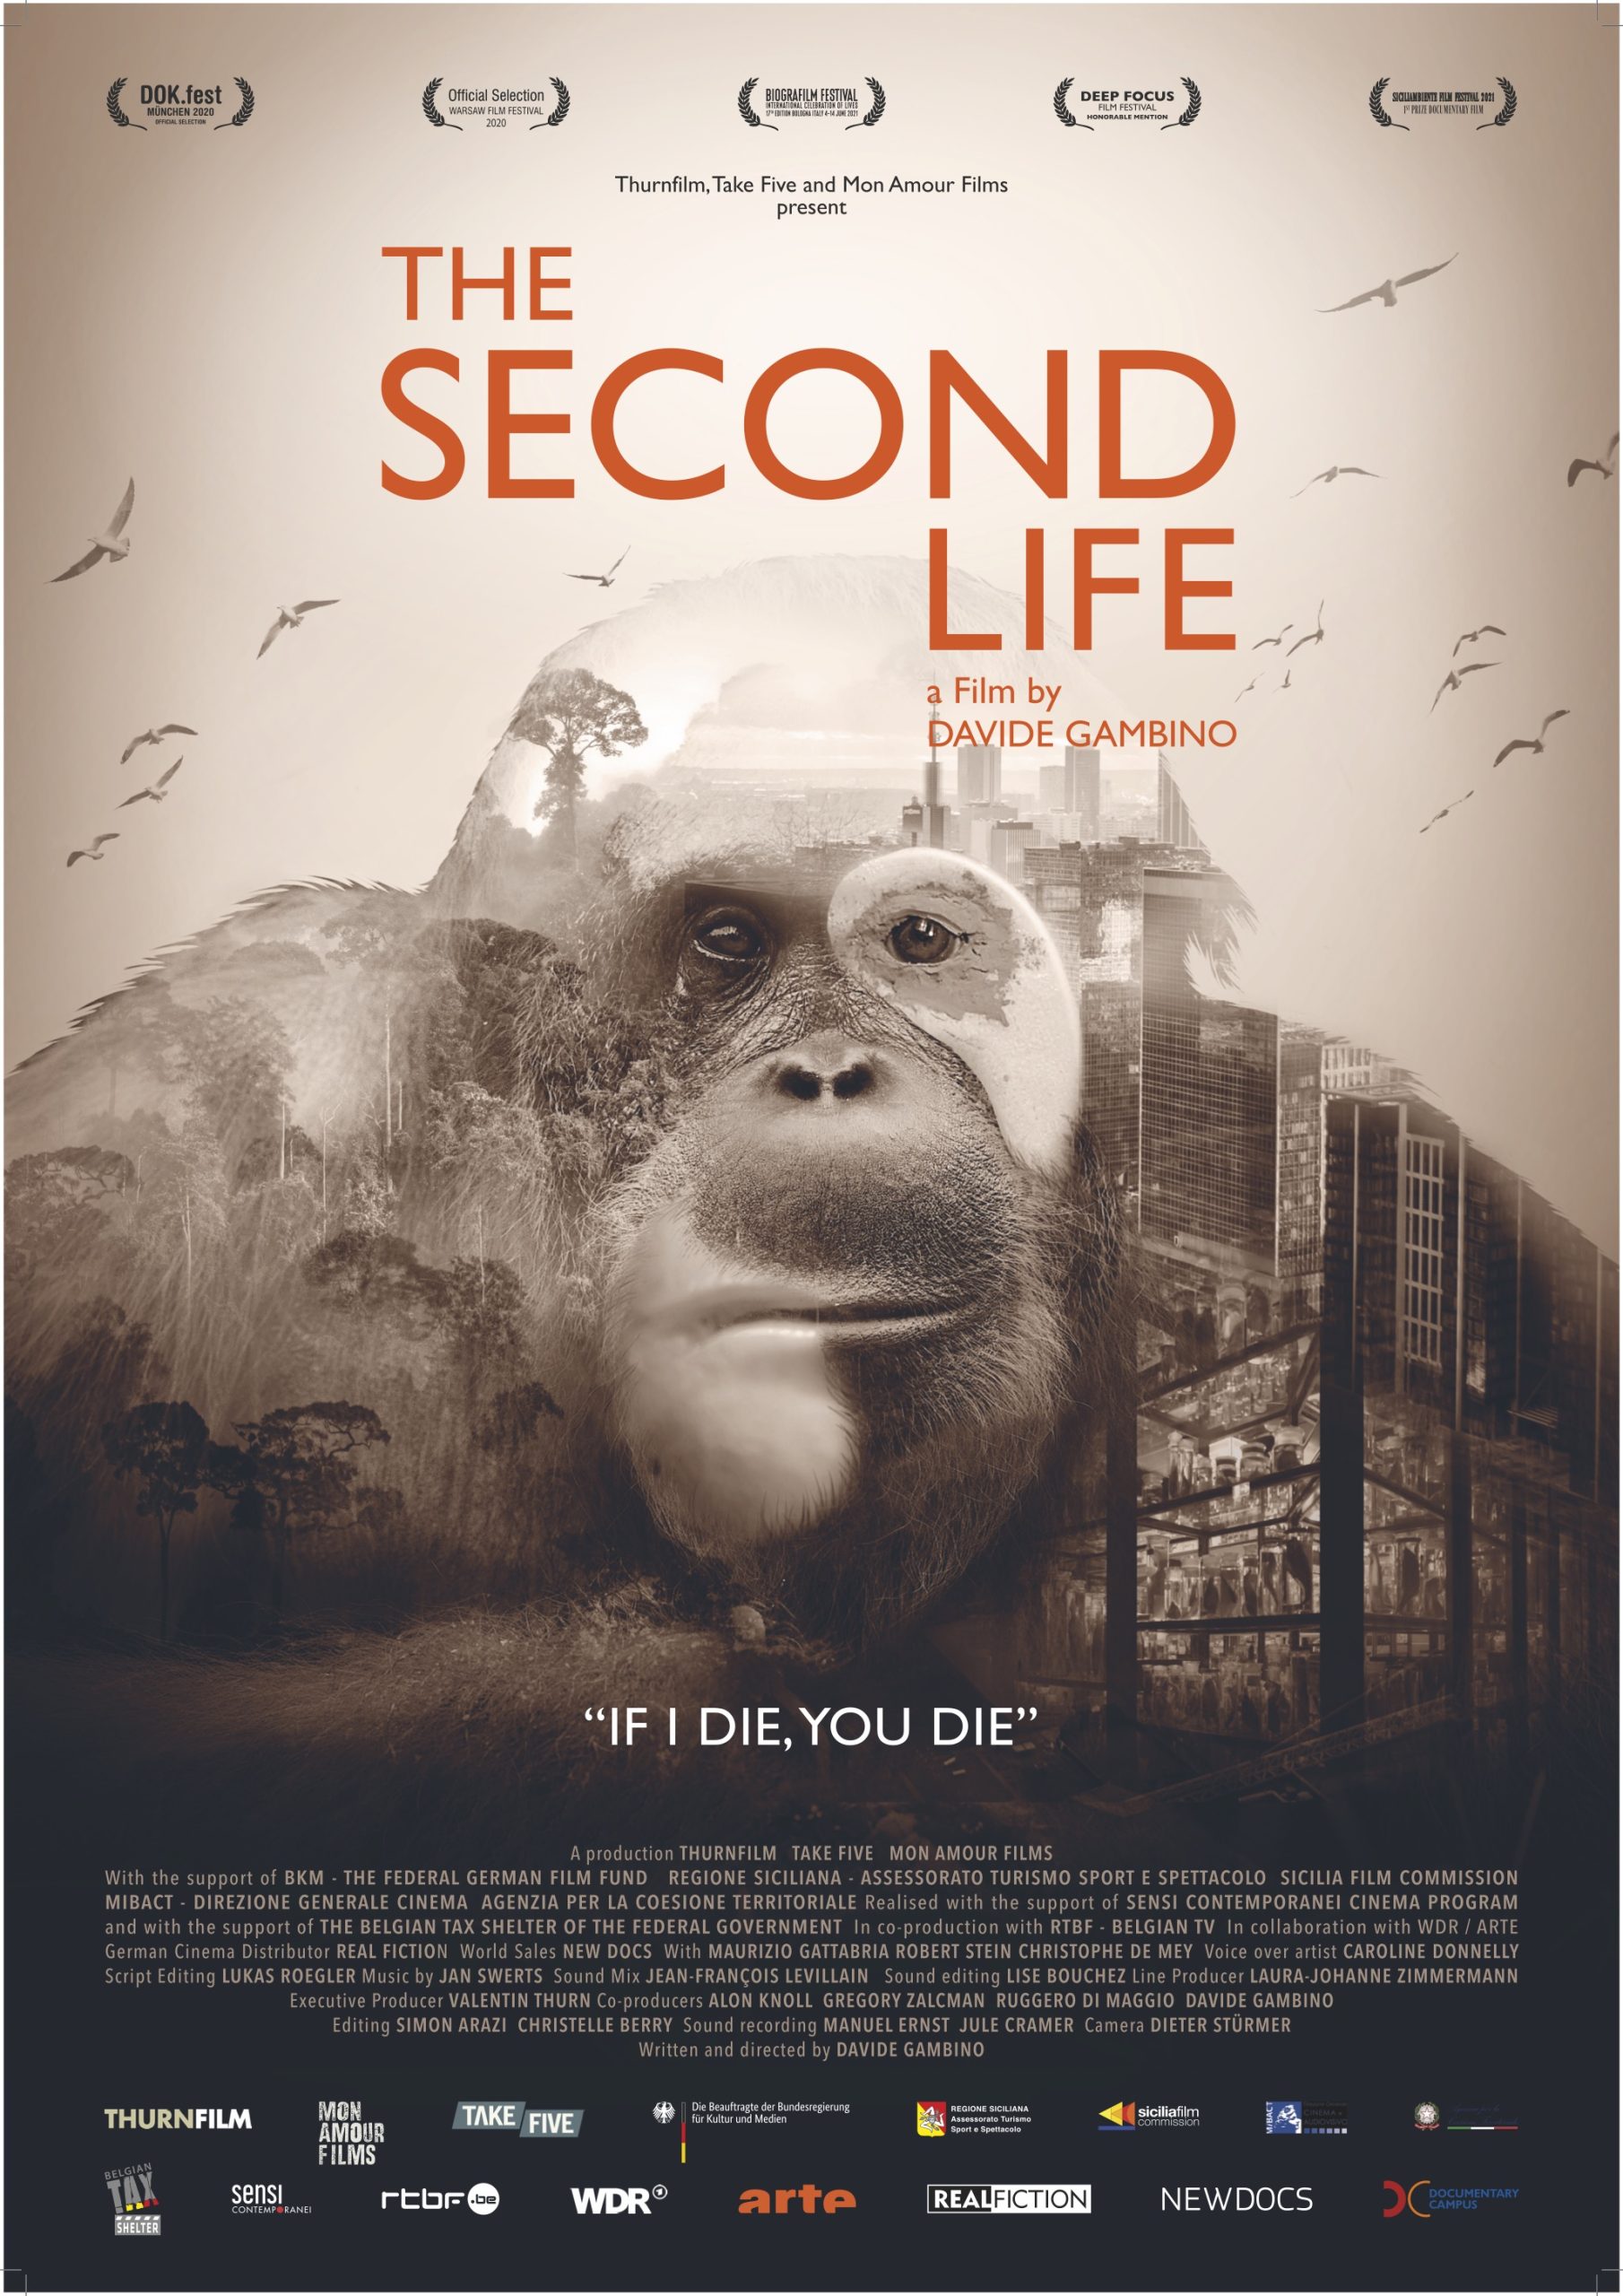 The second life